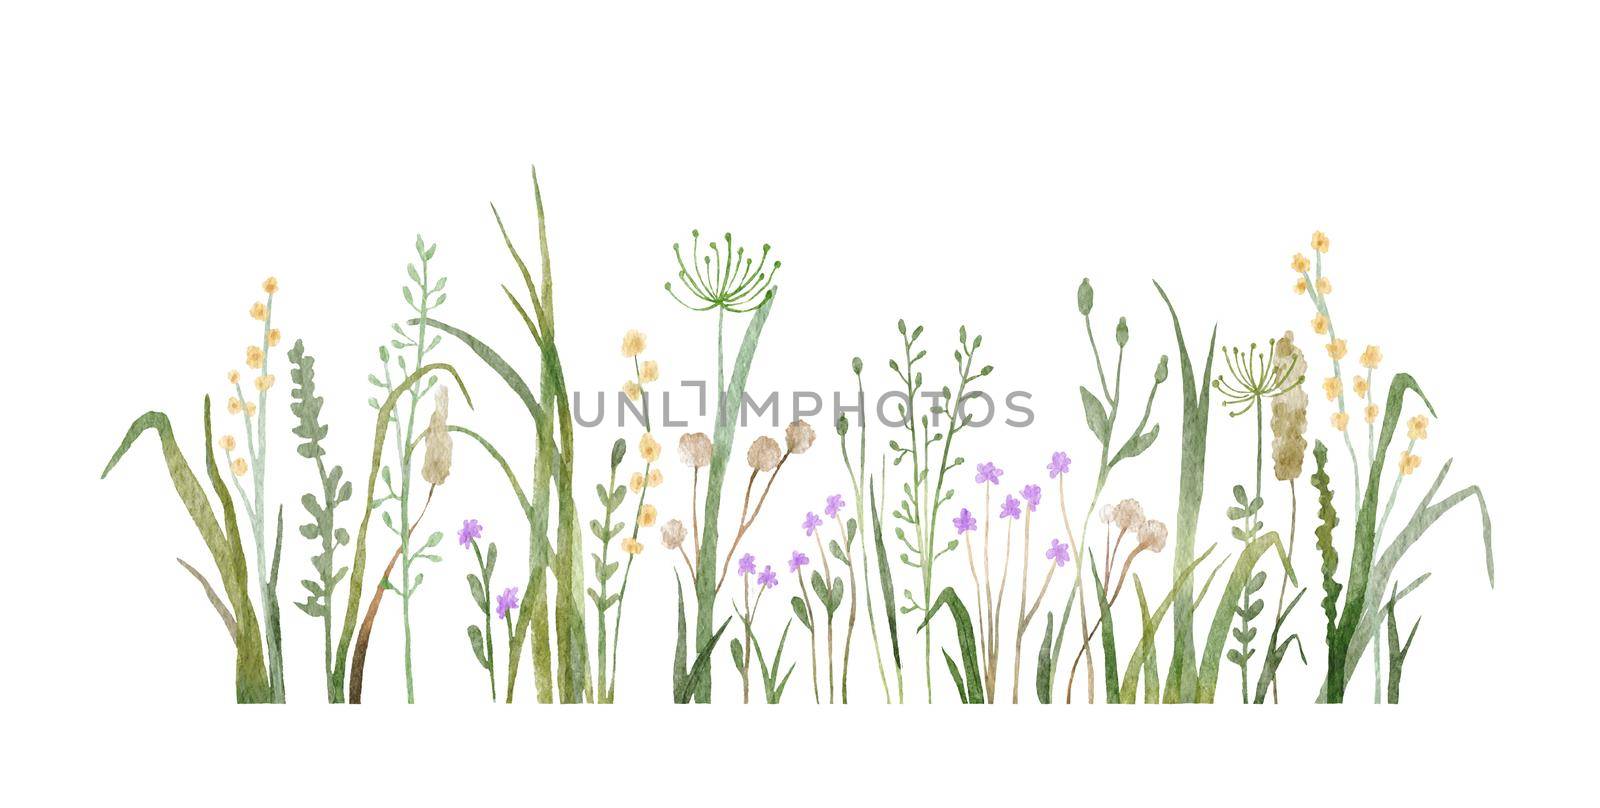 Watercolor wild herbs and flowers doodle illustration. Field with grass and wildflowers isolated on white background by ElenaPlatova